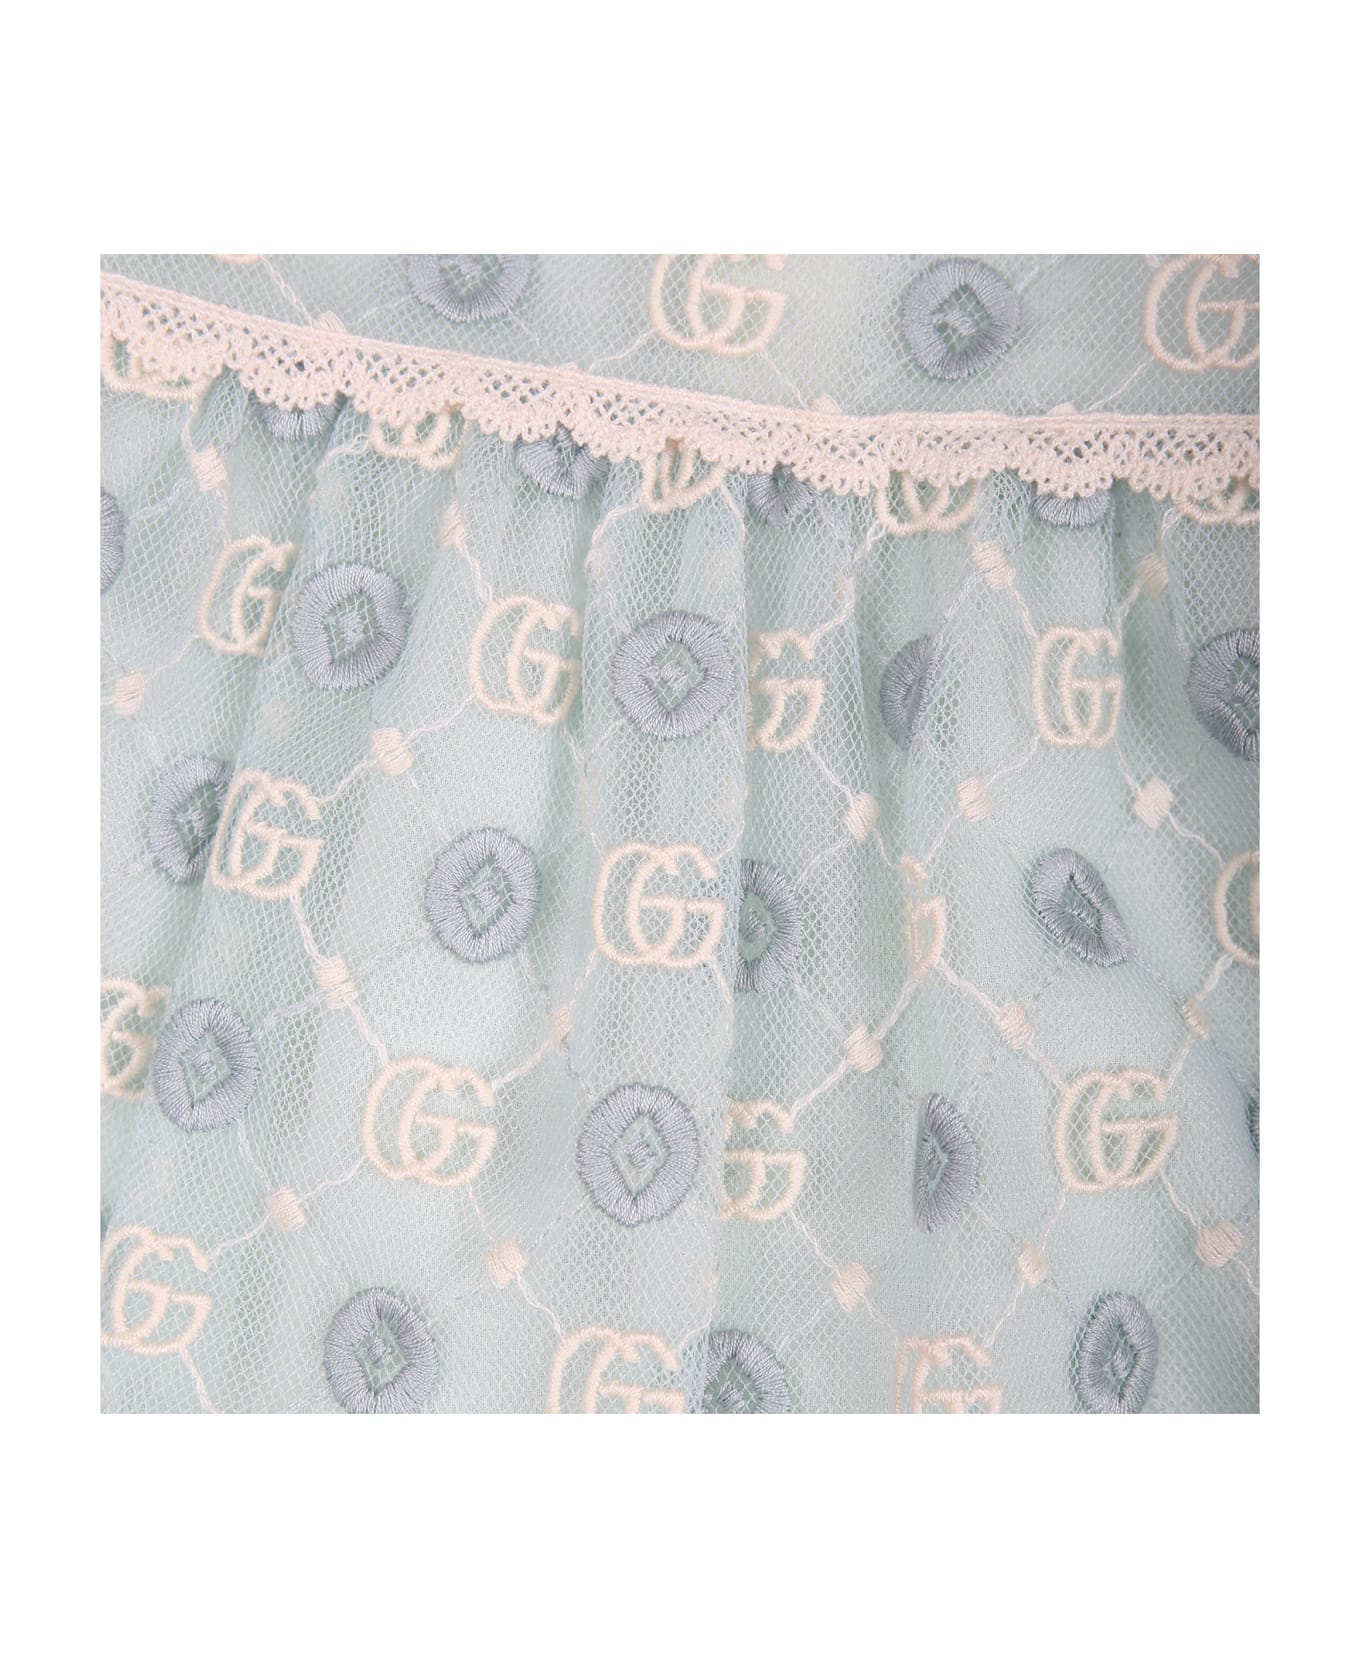 Gucci Red Light Blue Dress For Baby Girl With Geometric Pattern And Double G - Light Blue